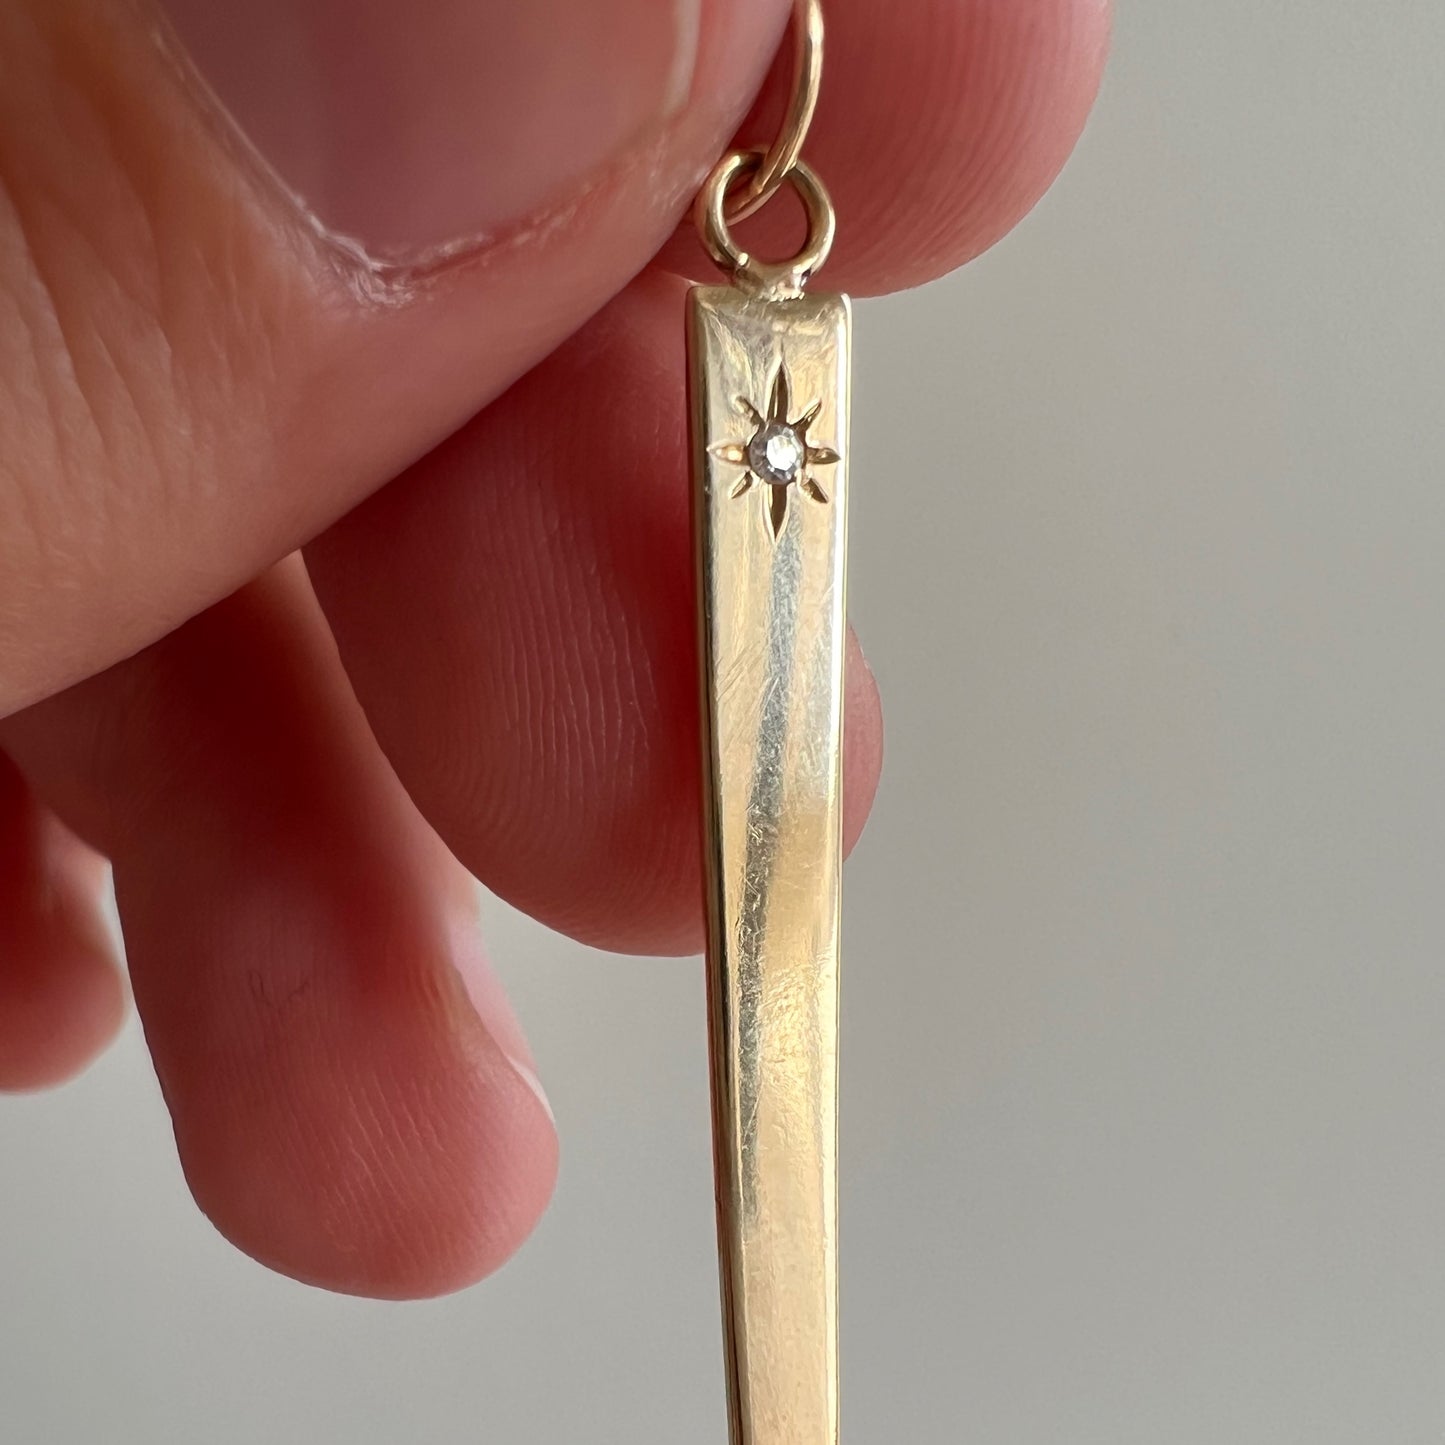 reimagined V I N T A G E // dream pick / 14k yellow gold and diamond toothpick / a pendant